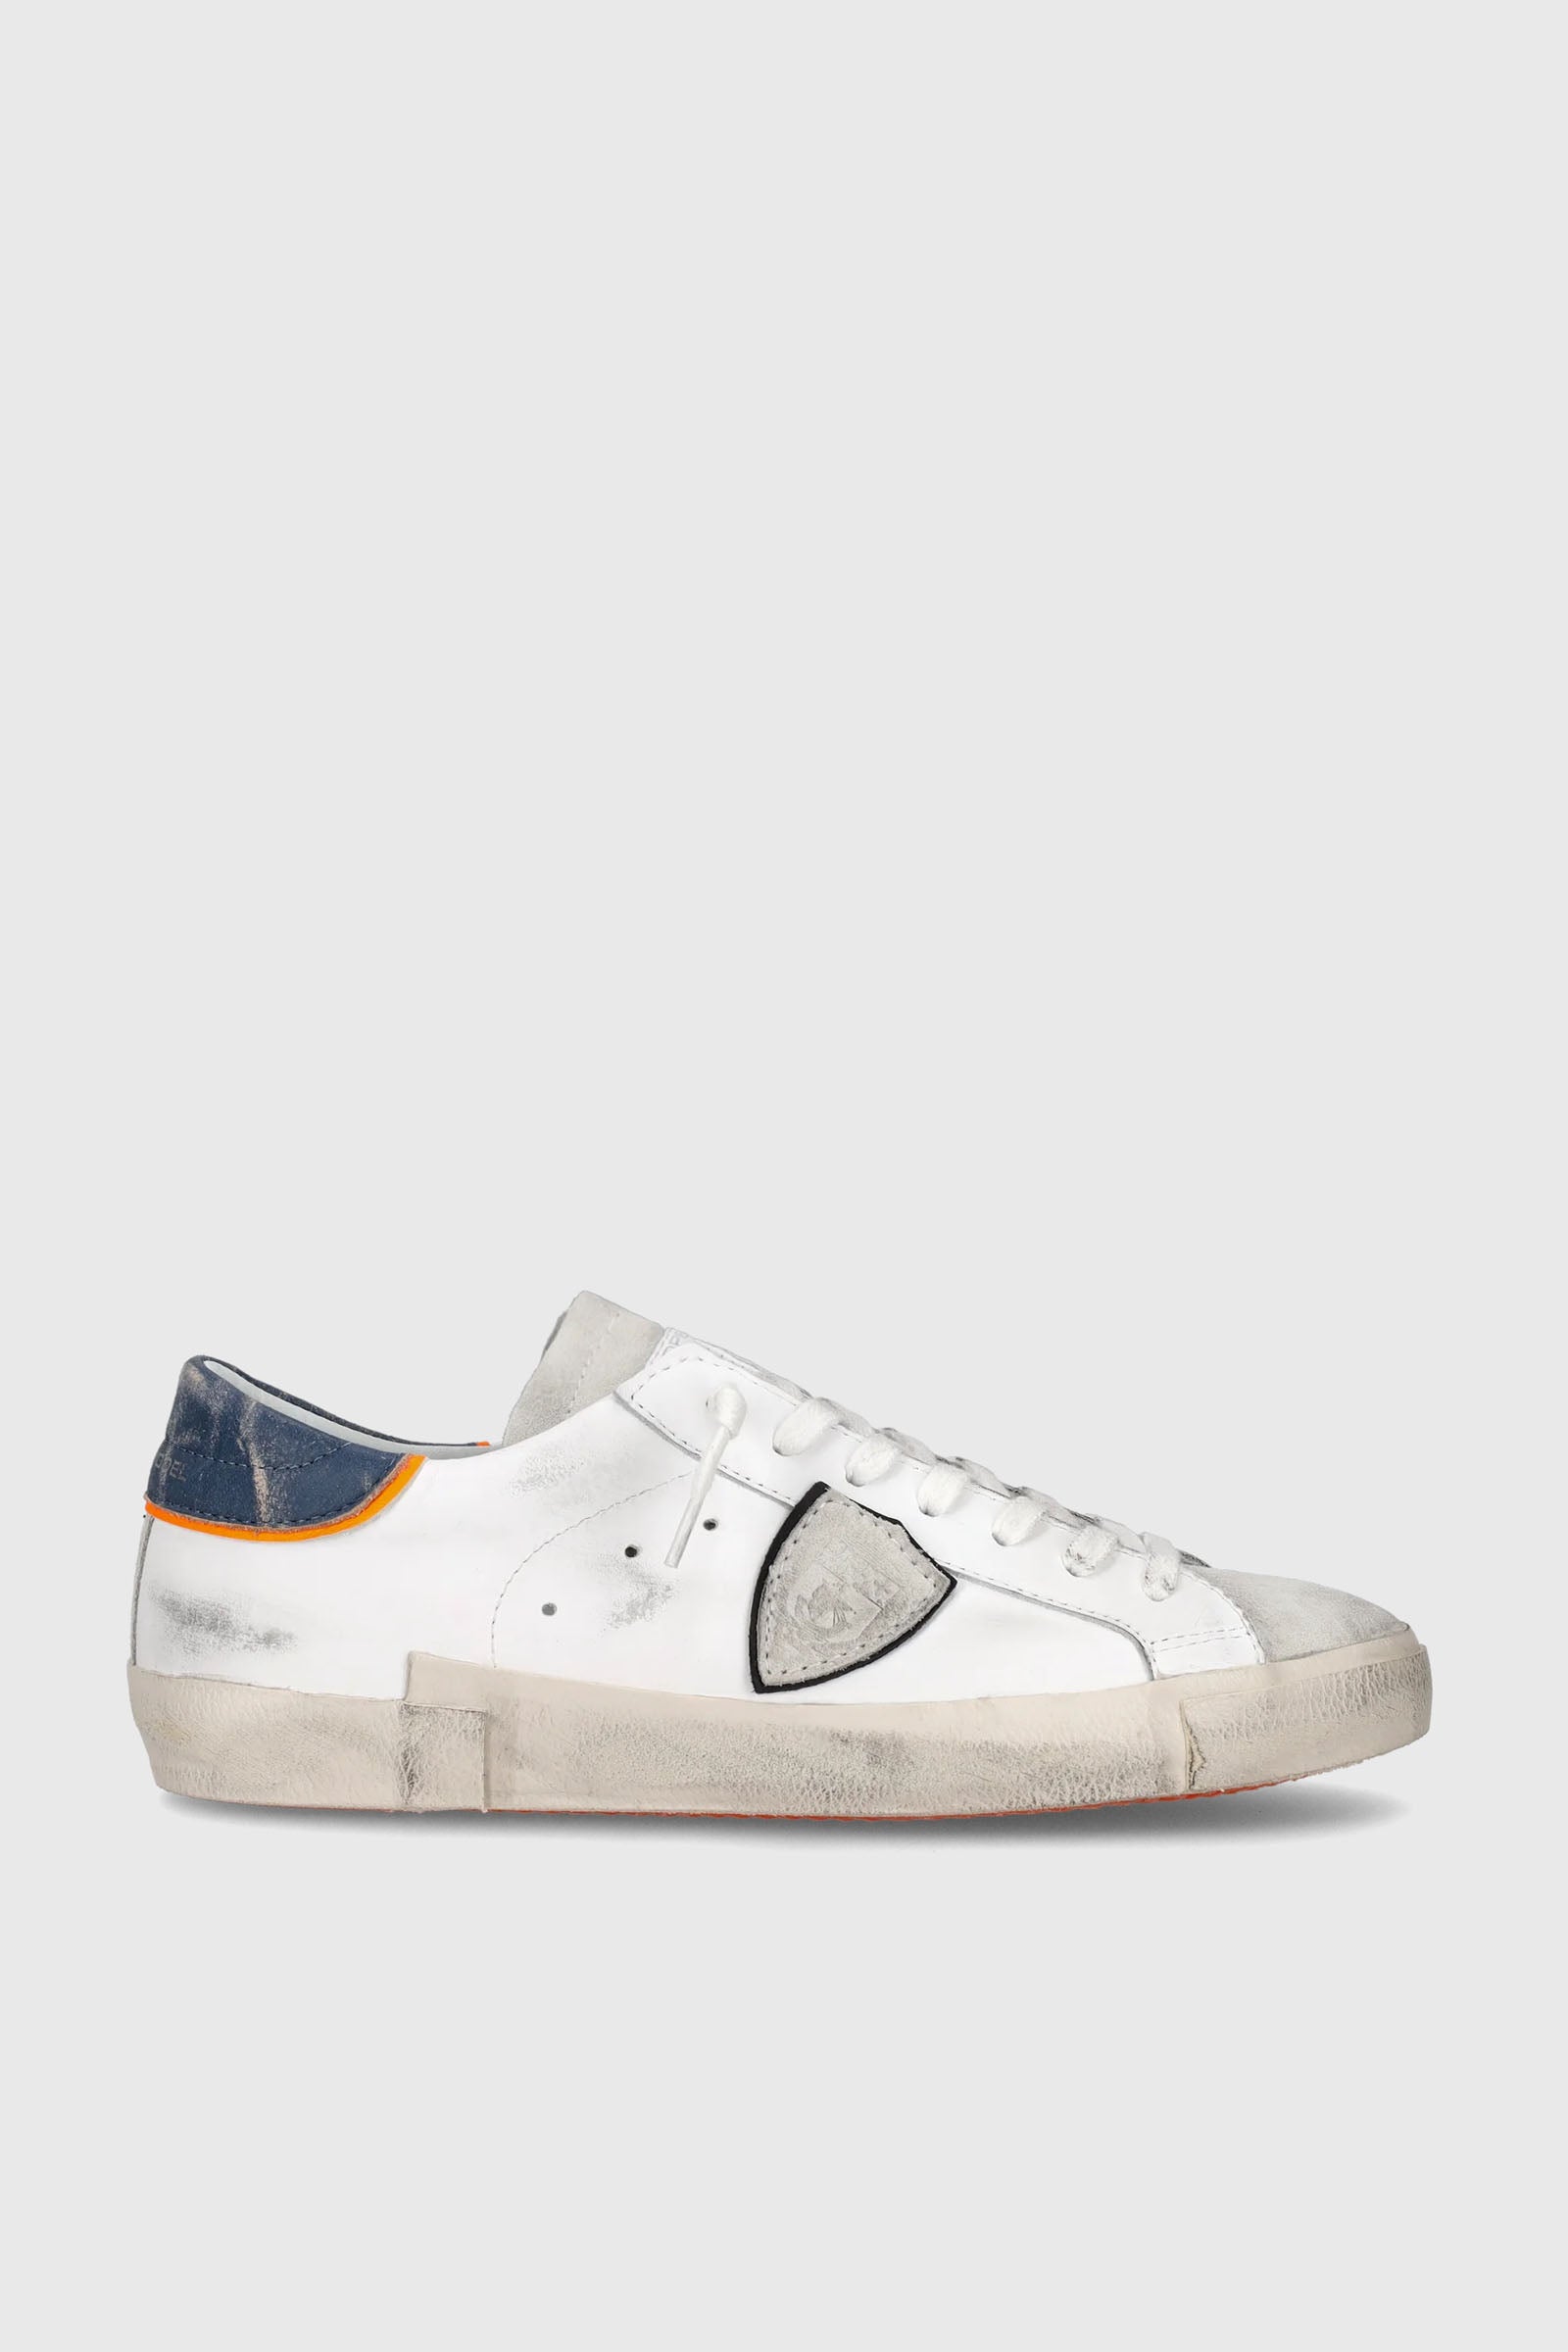 Philippe Model PRSX Vintage Veal Leather Sneakers White/Blue - 1